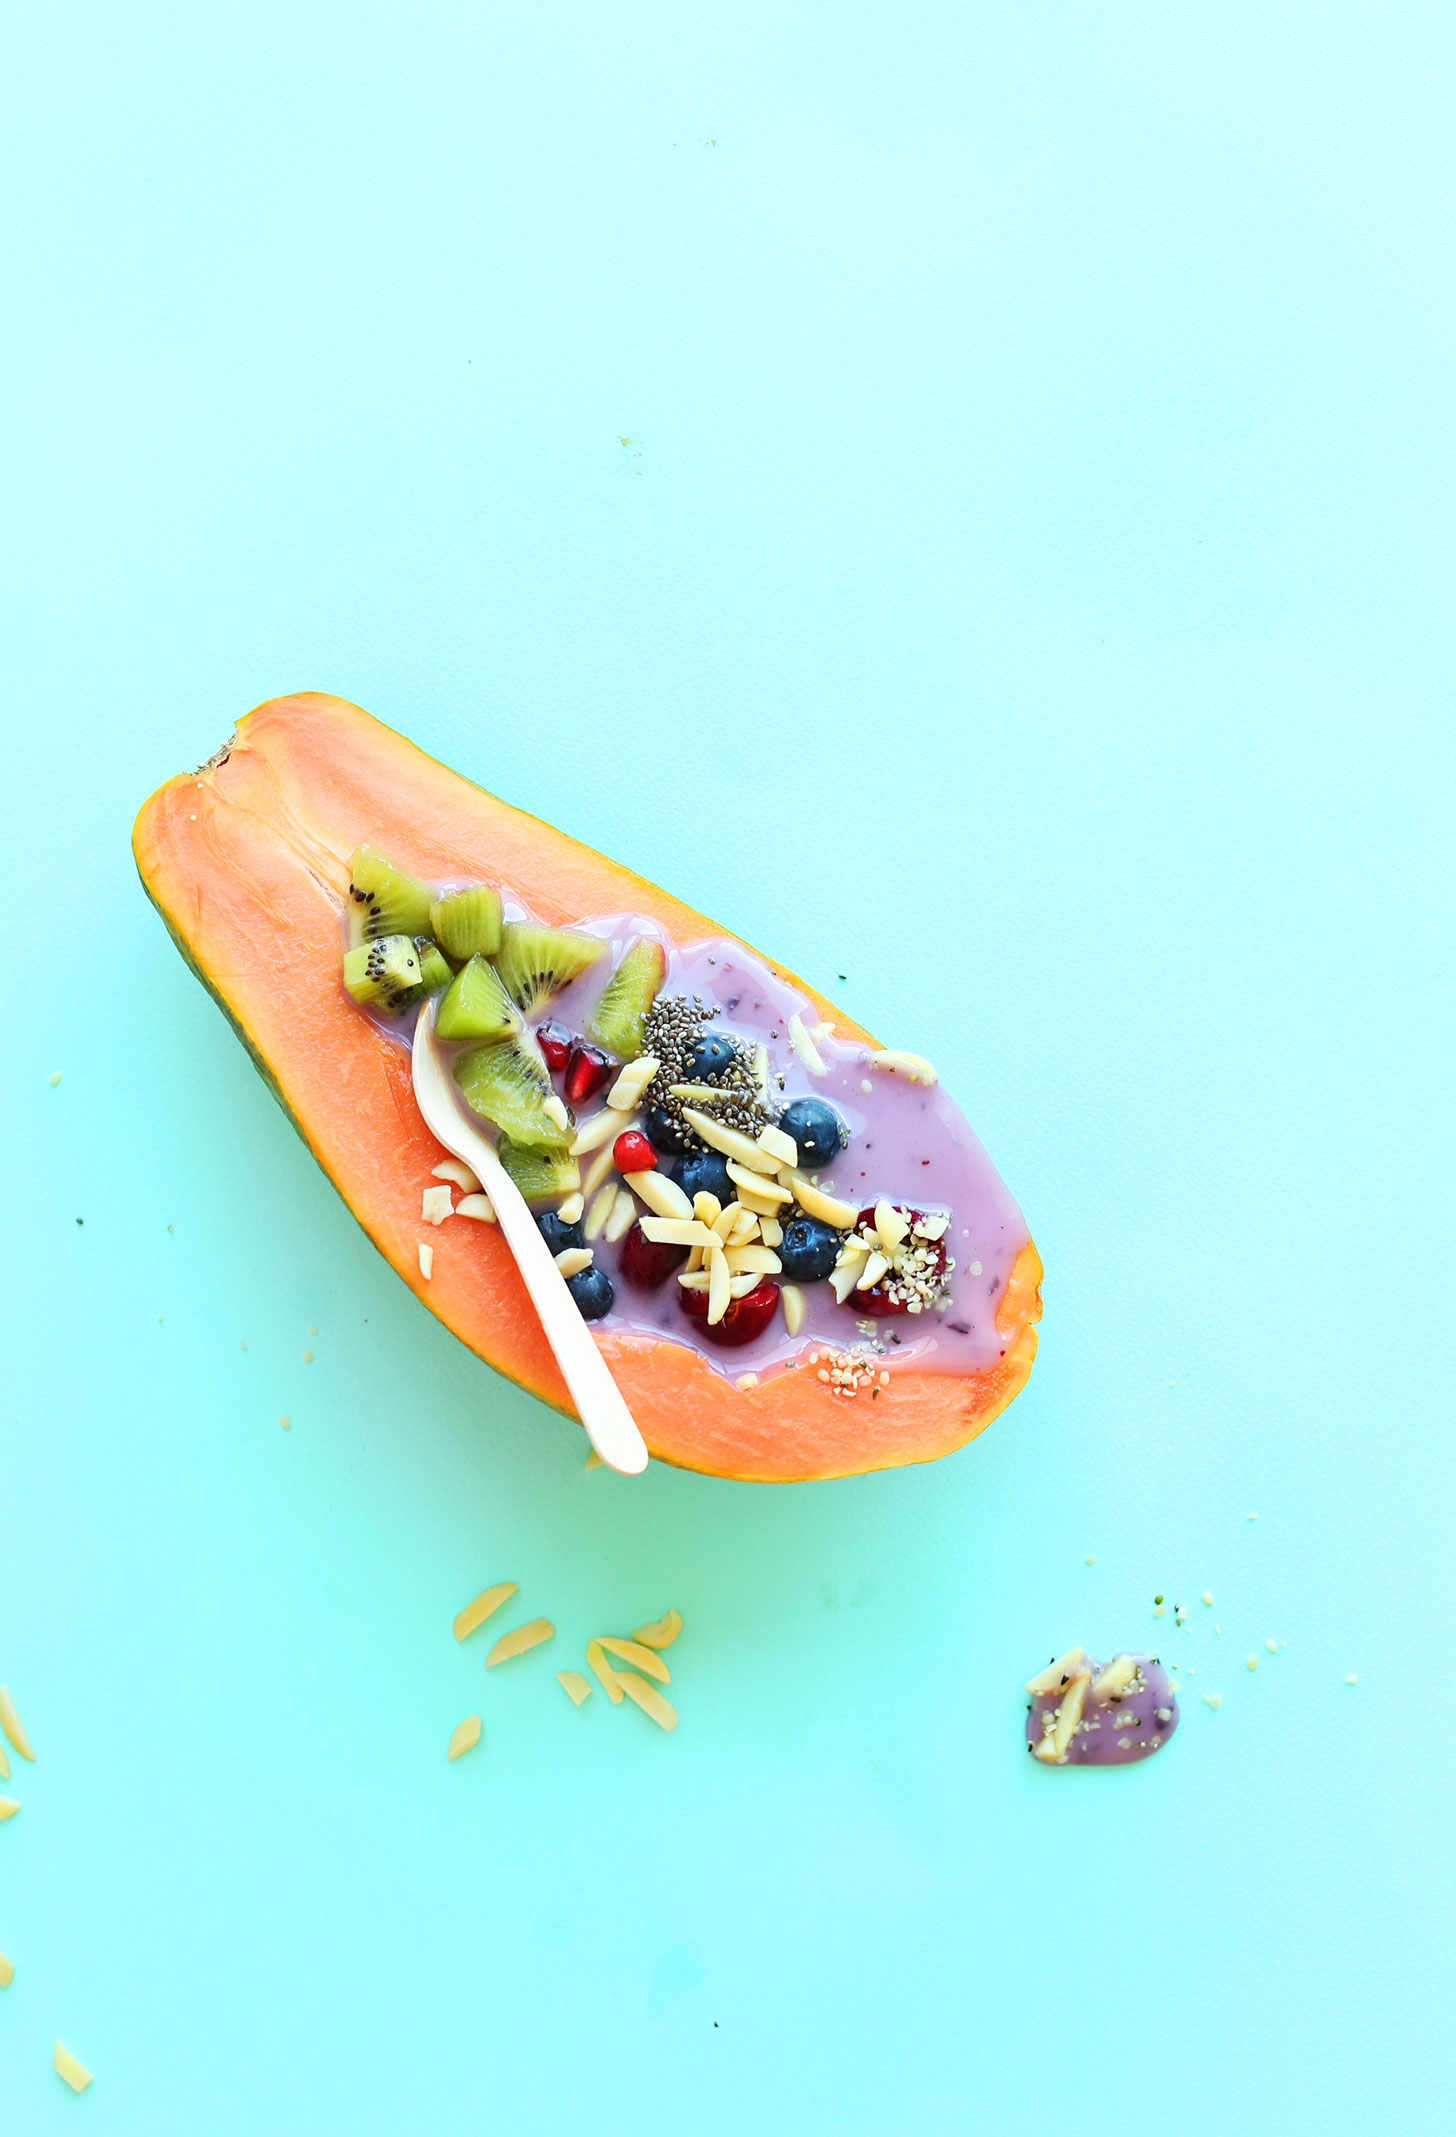 Using a spoon to eat a refreshing Papaya Boat for a simple gluten-free vegan breakfast